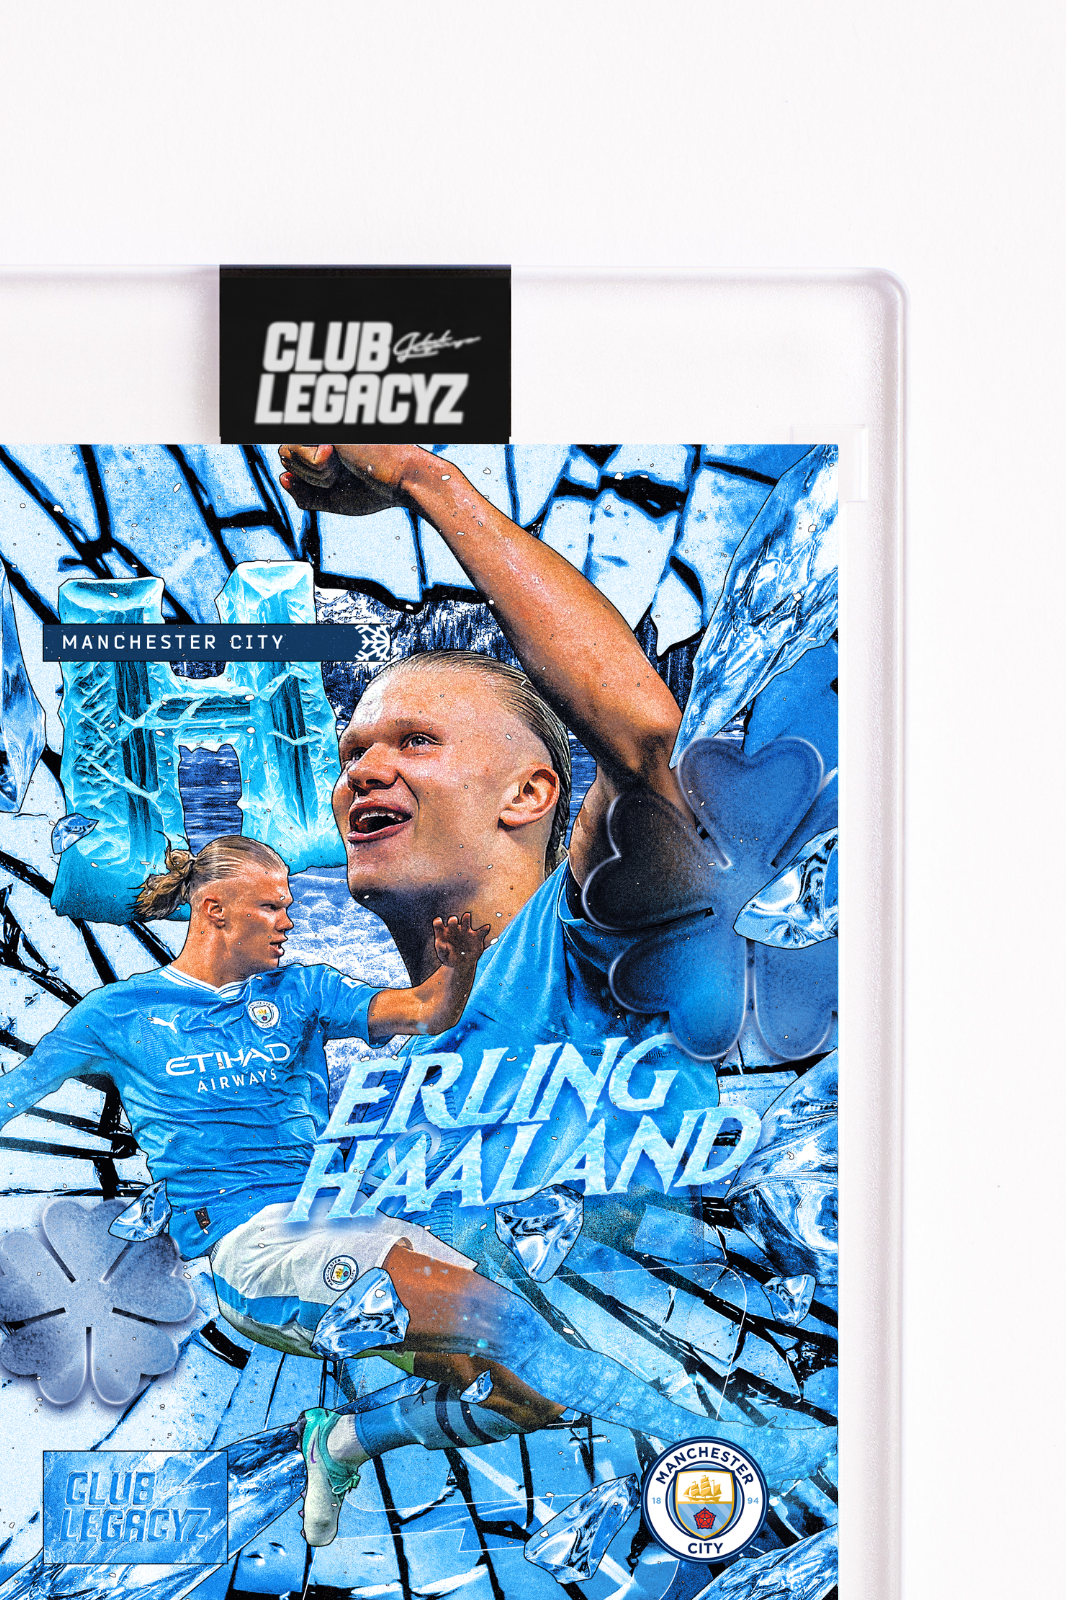 Manchester City - Erling Haaland Frozen Icon limited to 100